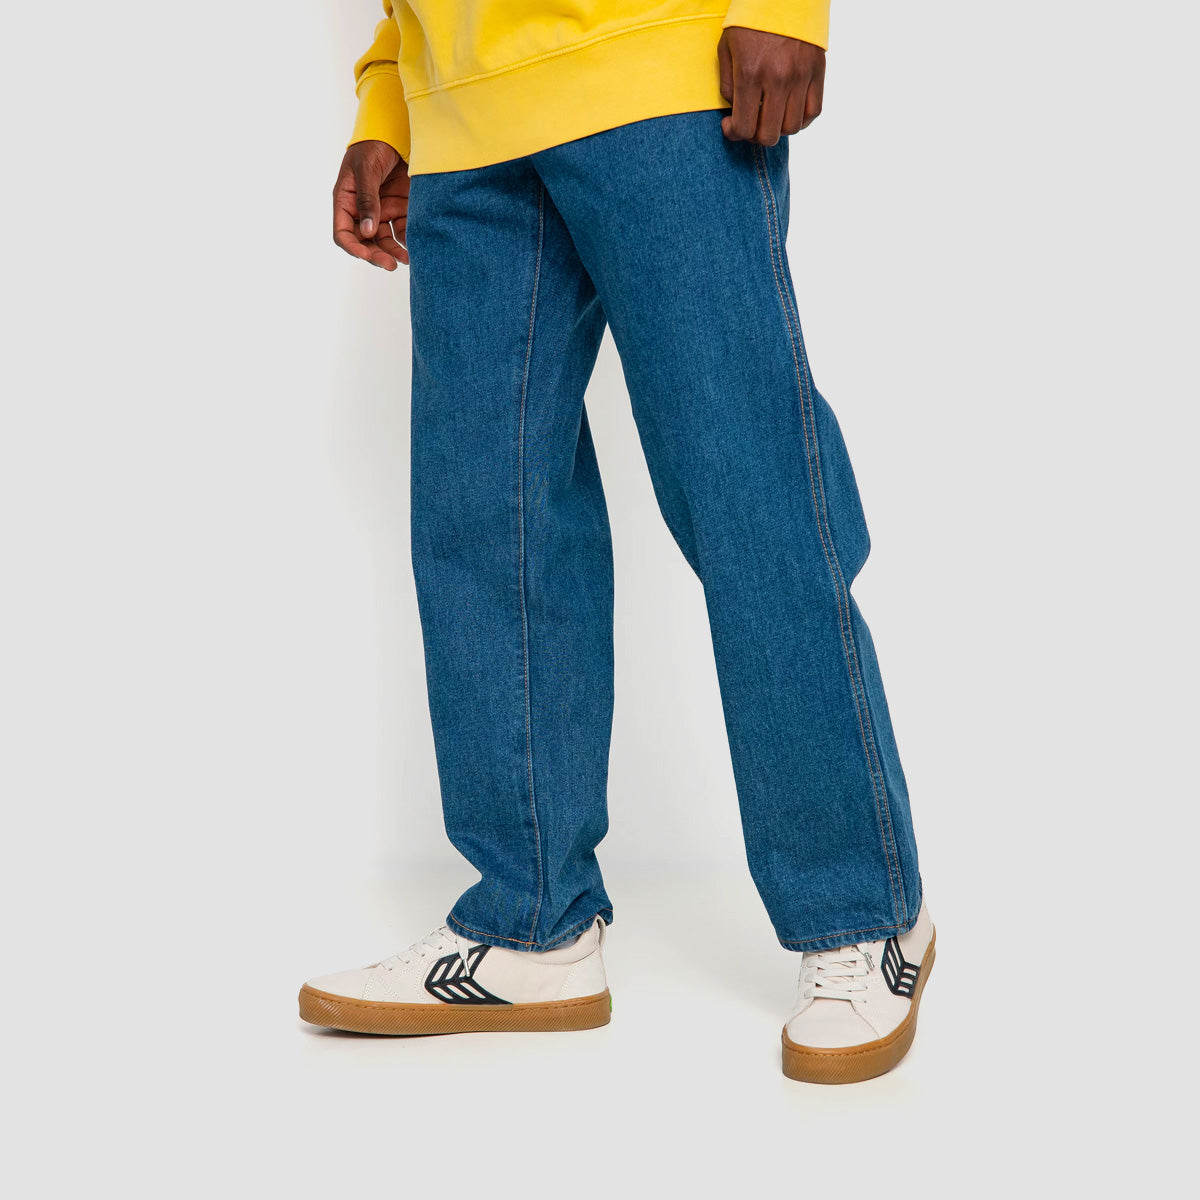 RVCA Americana Relaxed Fit Jeans Blue Collar